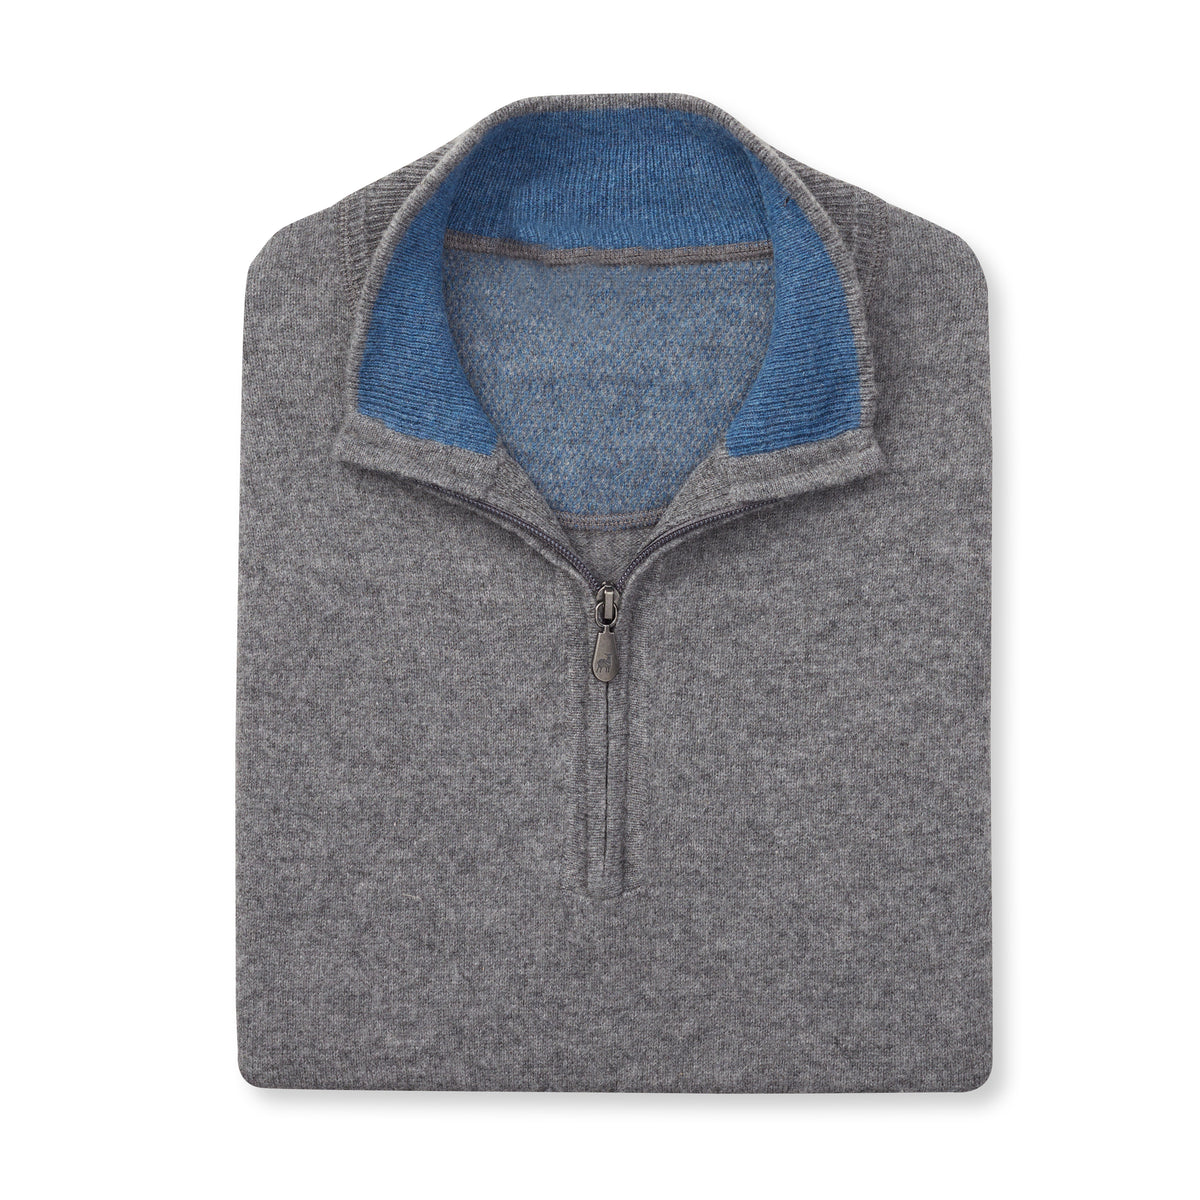 THE RODEO CASHMERE HALF ZIP SWEATER - Granite OS35709HLS